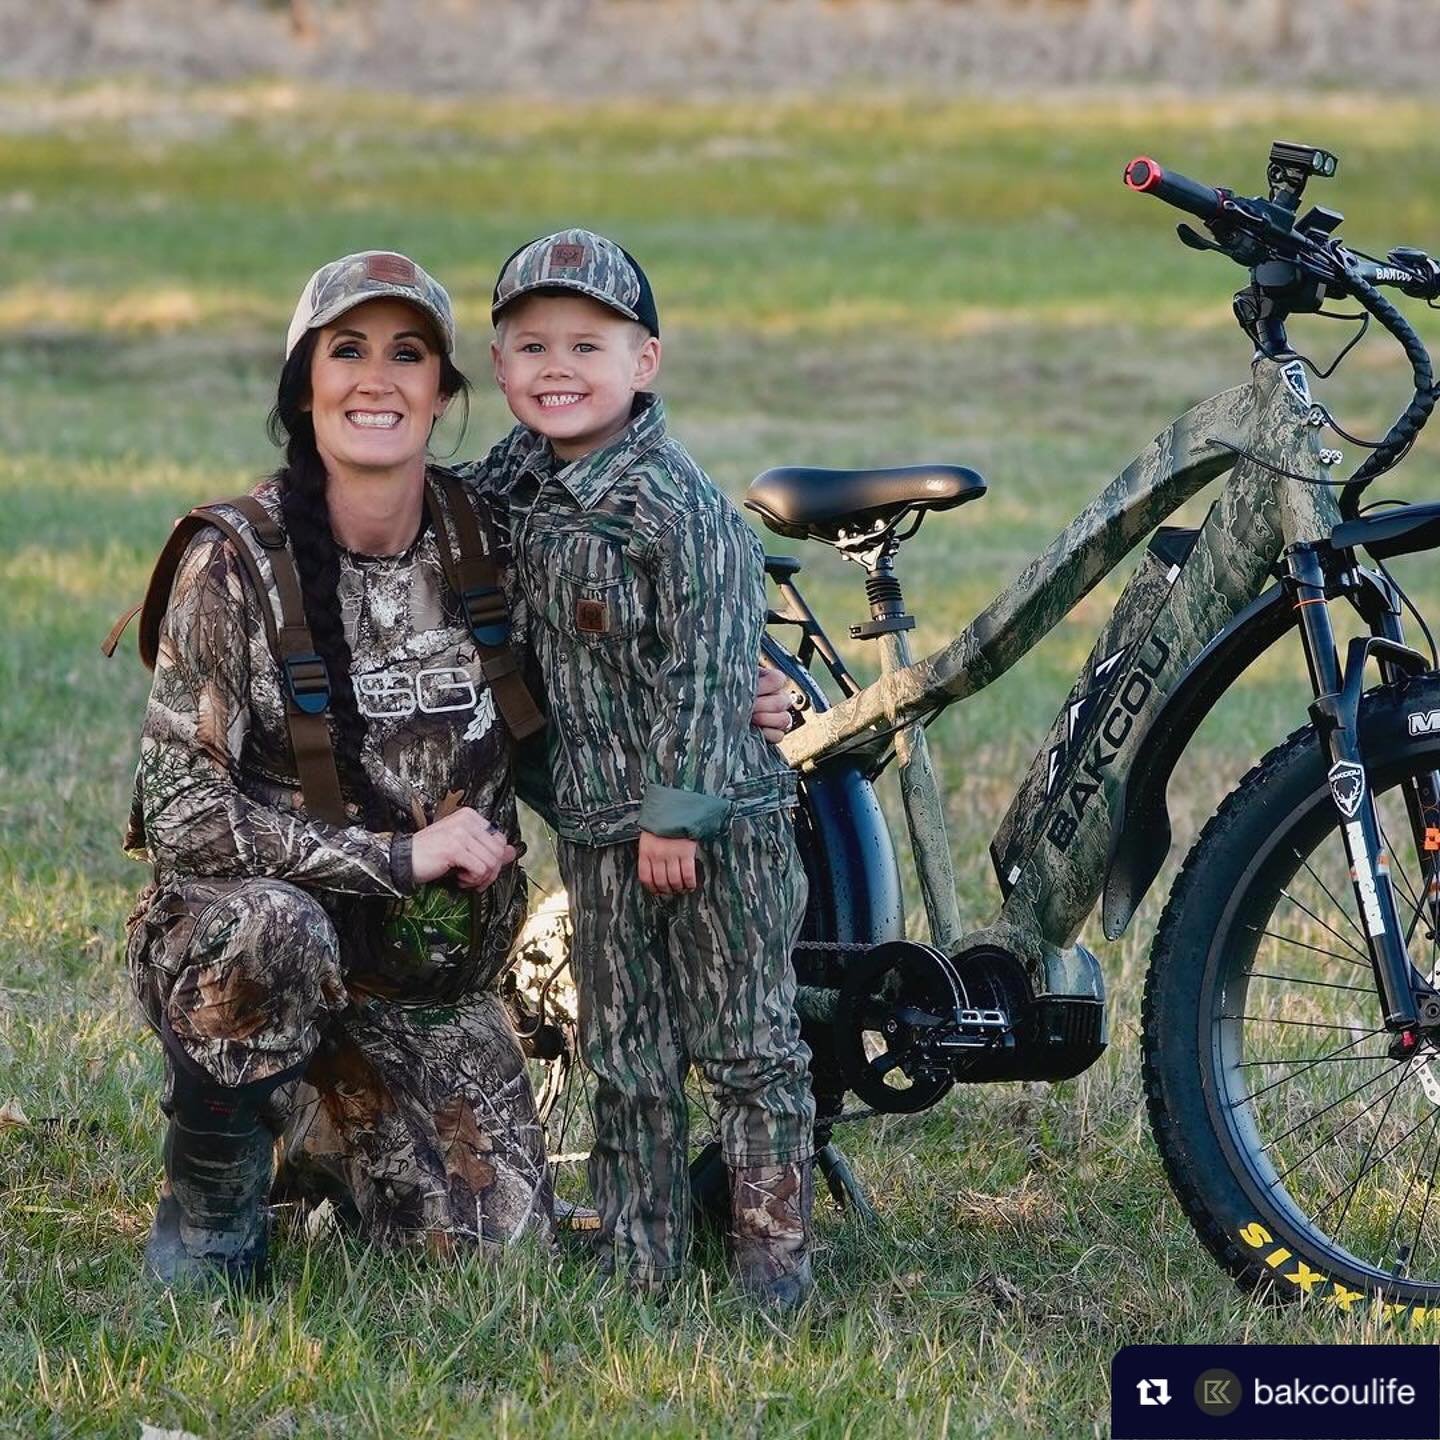 @bakcoulife has a Mother&rsquo;s Day celebration going on &amp; it starts now!! 👇🏼

For a short time, buy Mom a new eBike, save $200, and pick out a free trailer!! 

Surprise mom with something she&rsquo;ll love and maybe she&rsquo;ll even let you 